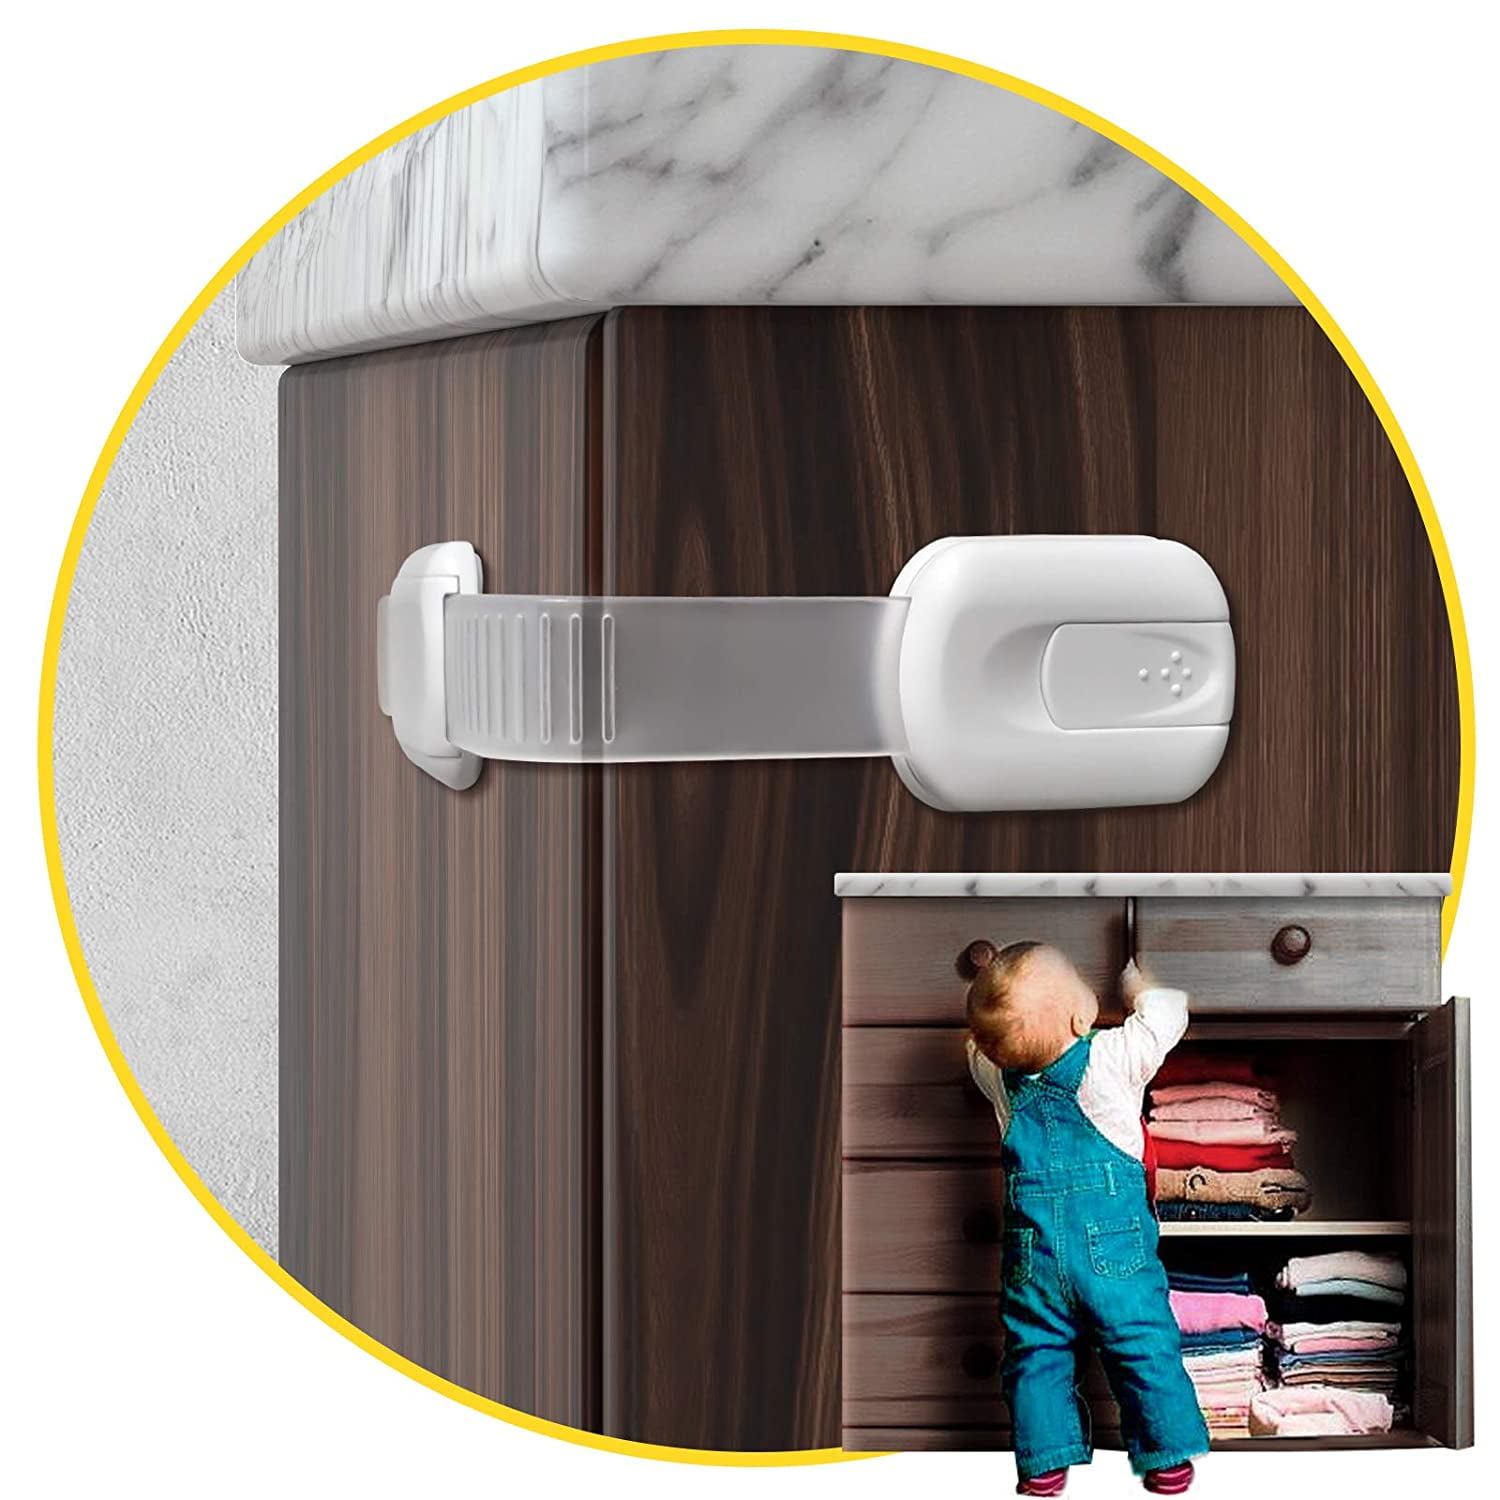 8 + 16 Baby Safety Kit Child Safety Cabinet Strap Locks Refrigerator Drawers No Drilling Needed Child Proof Cabinet Locks Multi Use Latches Adjustable Baby Proofing Locks for Cabinets 